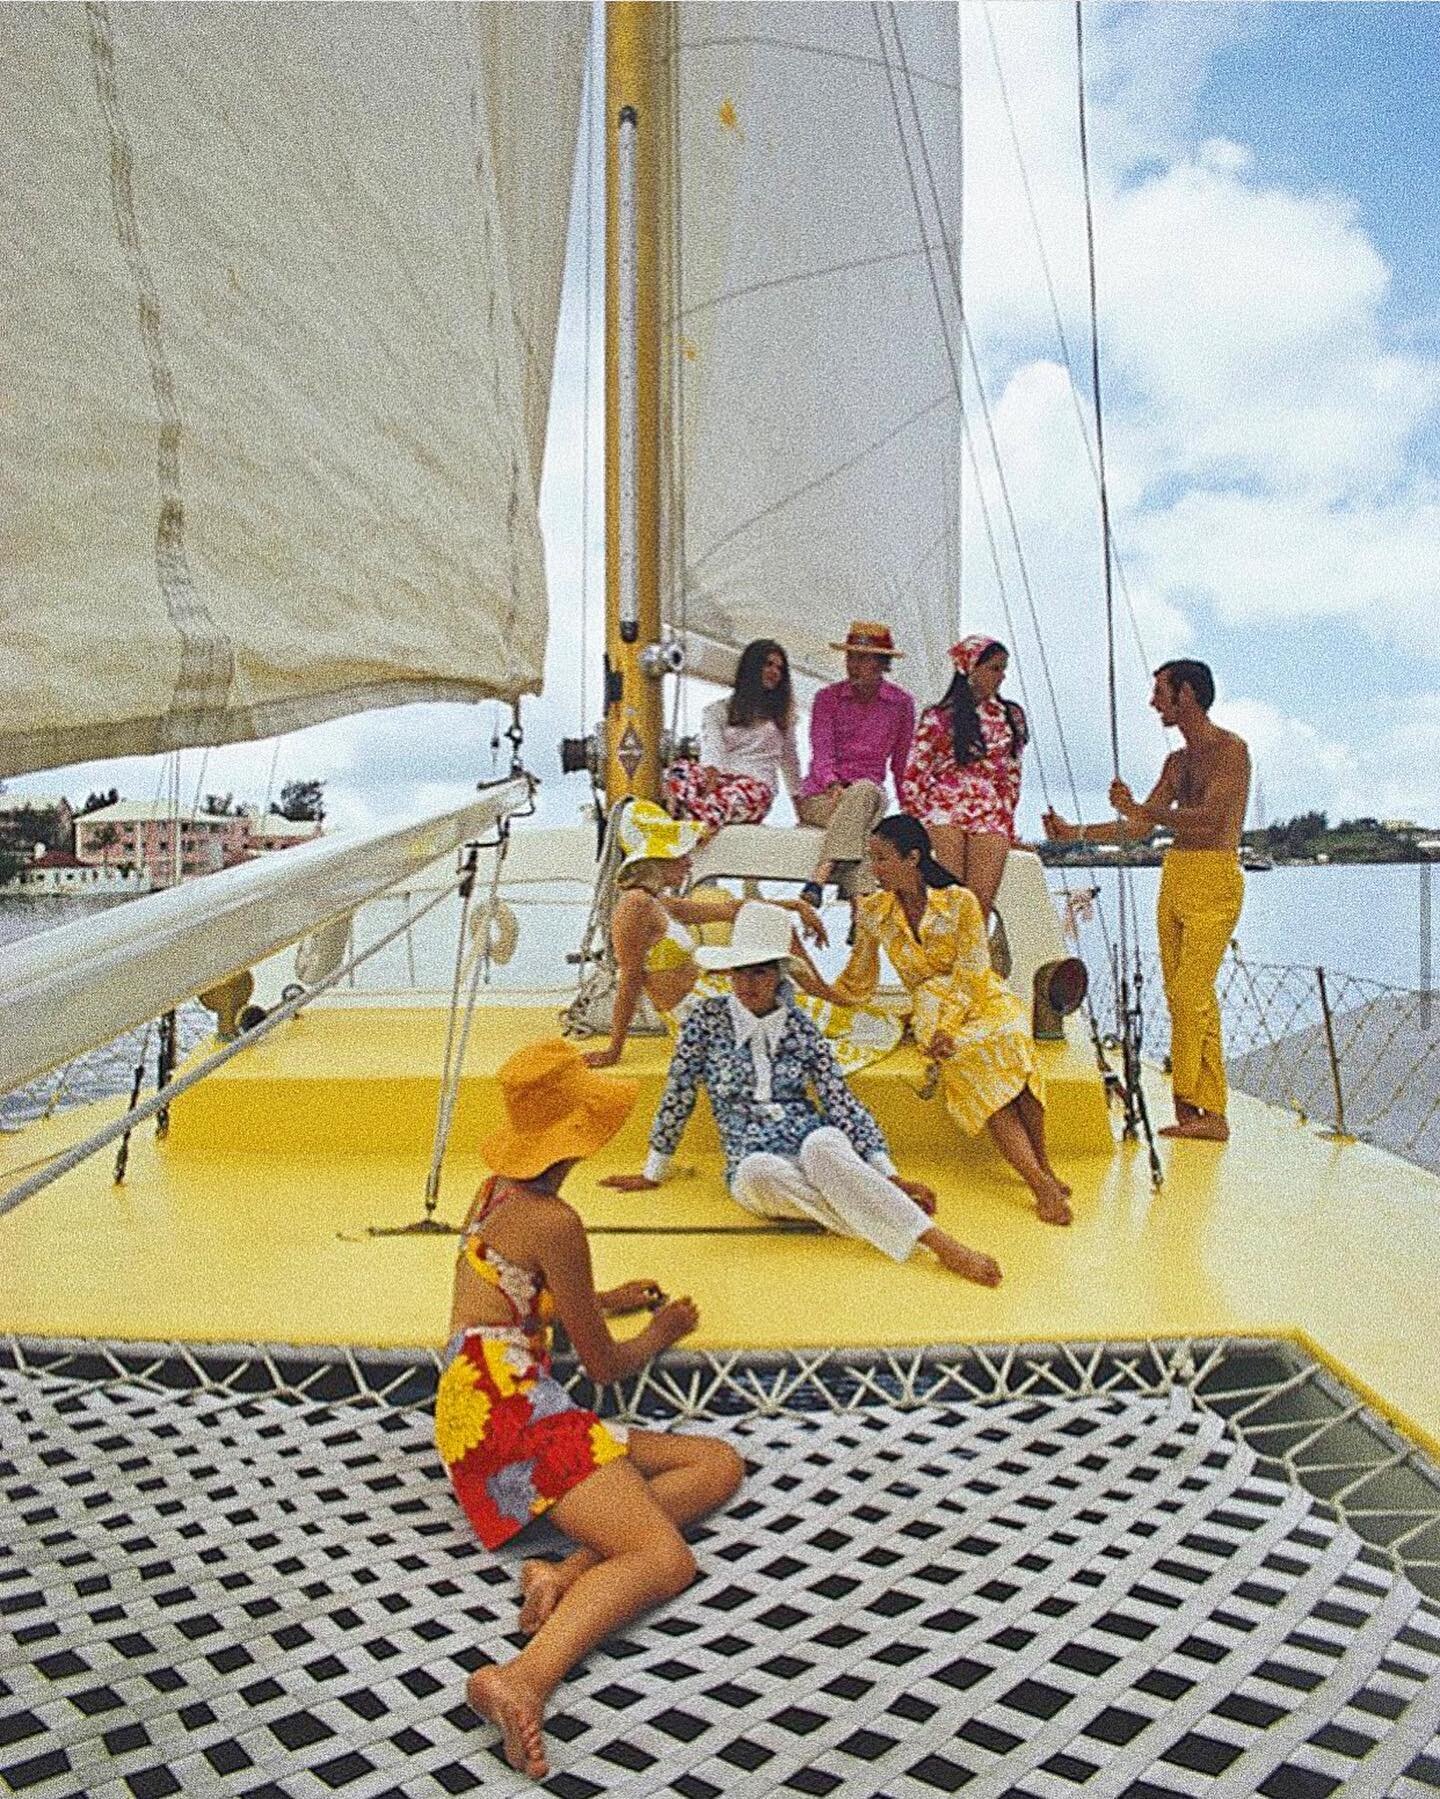 Party on a boat ✨ Bermuda, 1970 by Slim Aarons (getty images). Fun fact - this was the clothing brand Calypso&rsquo;s company boat 🌞
.
.
.
.
.
.
#vintageparty #slimaarons #vintagelifestyle #vintageshop #vintageinspo #shopvintage #vintageglamour #vin